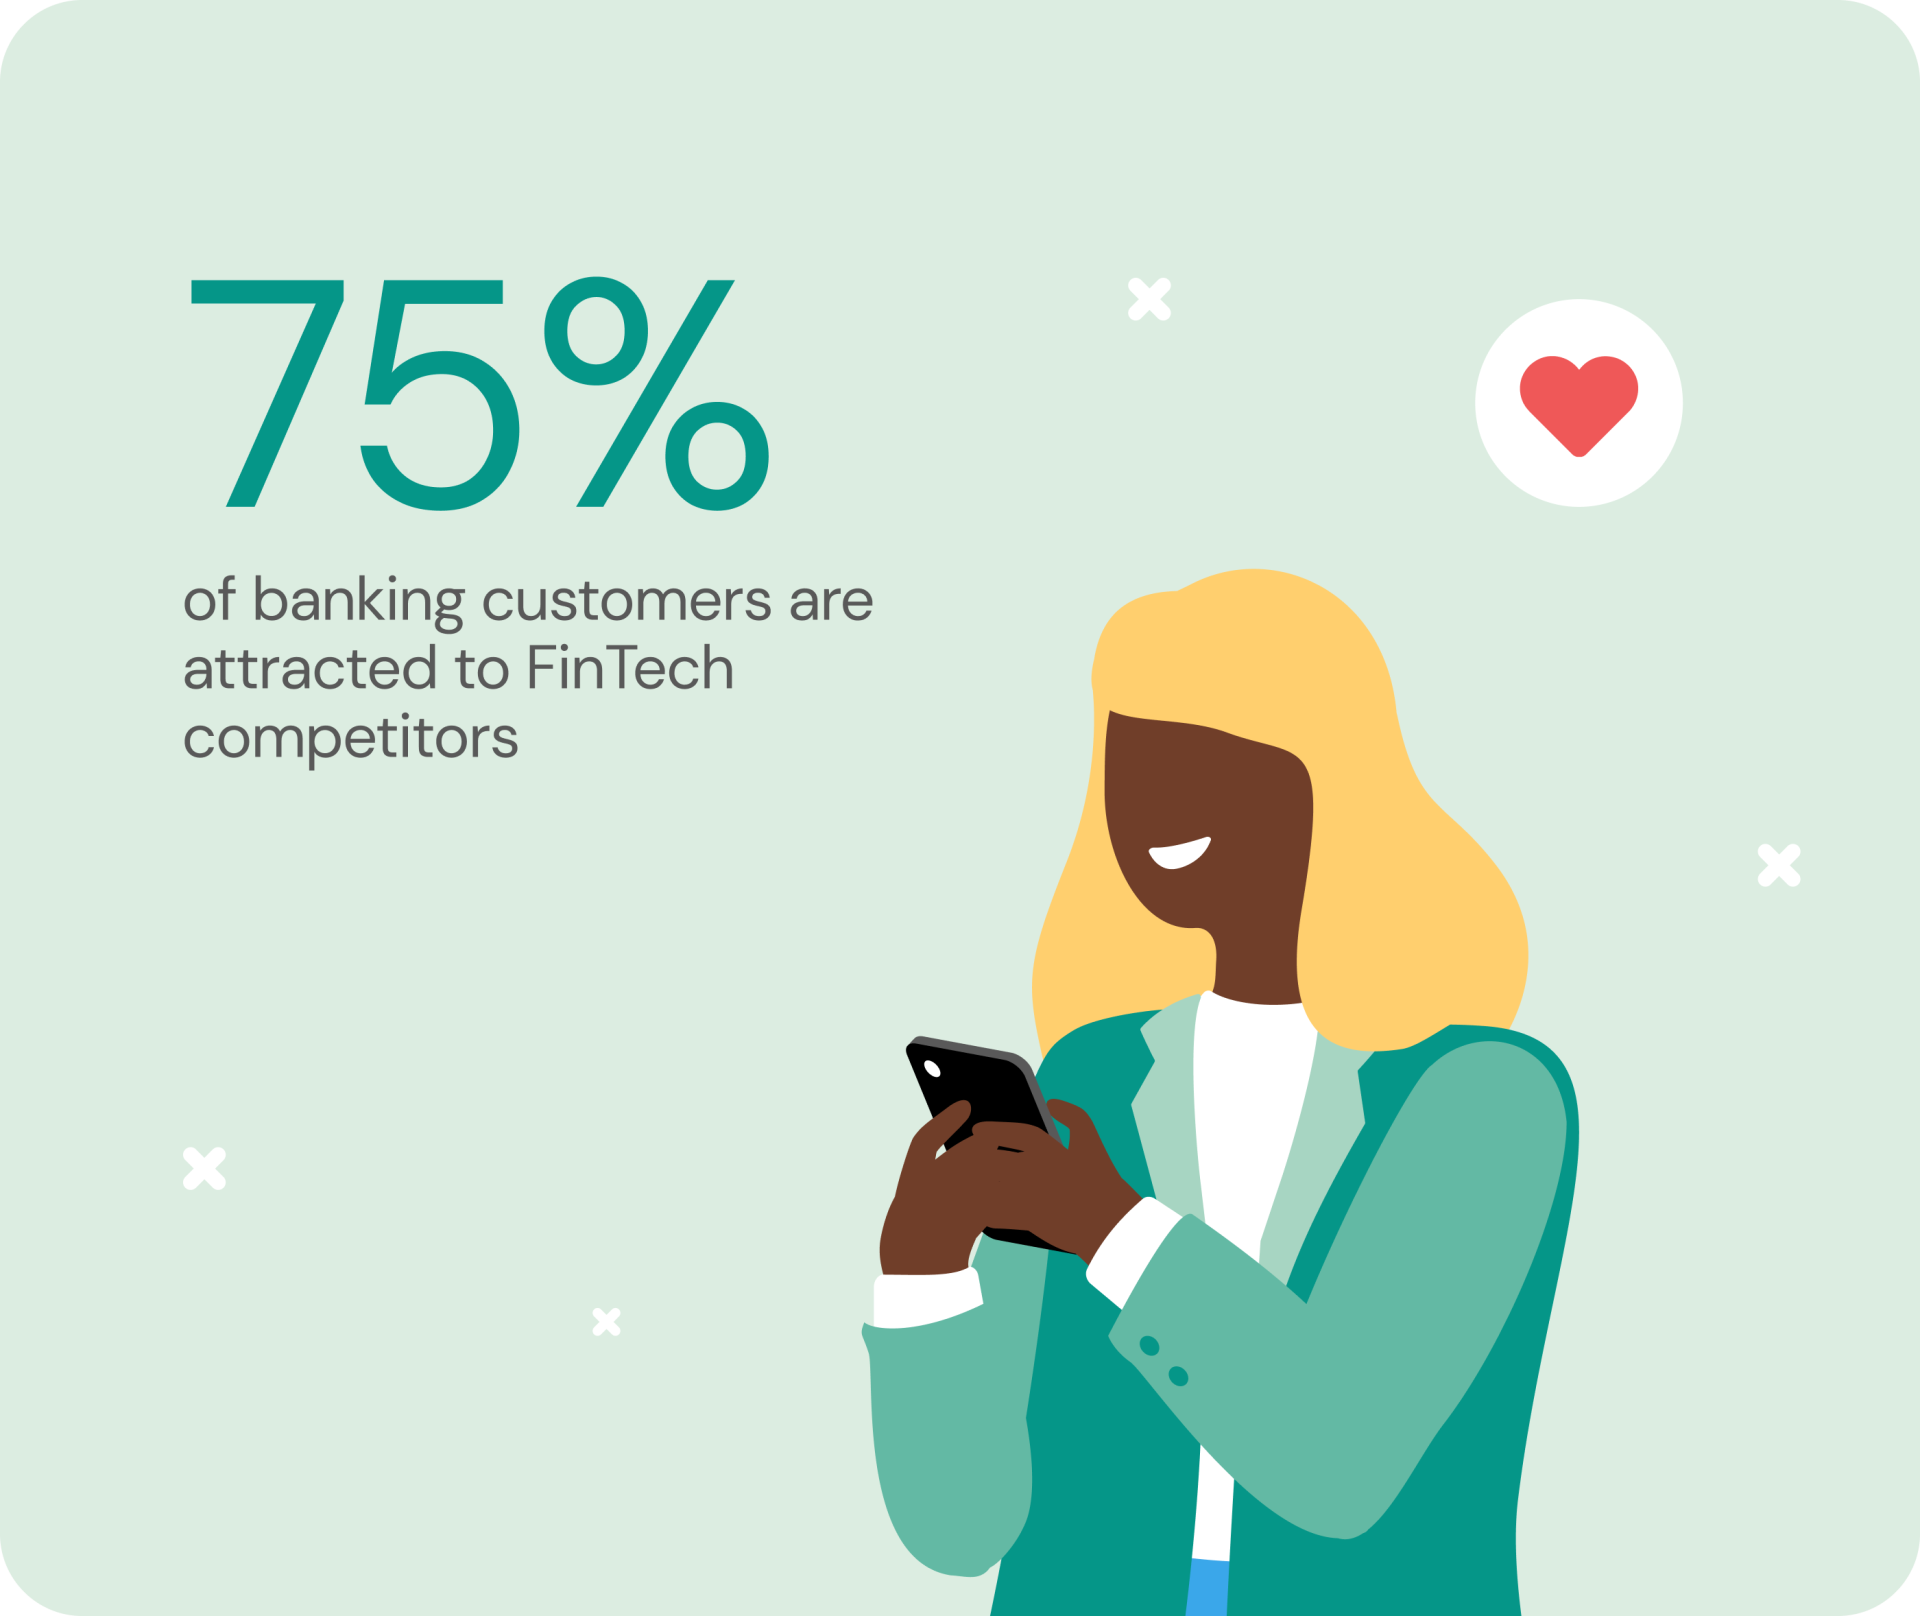 Omnichannel banking stat reiterating 75% of customers attracted to fintech